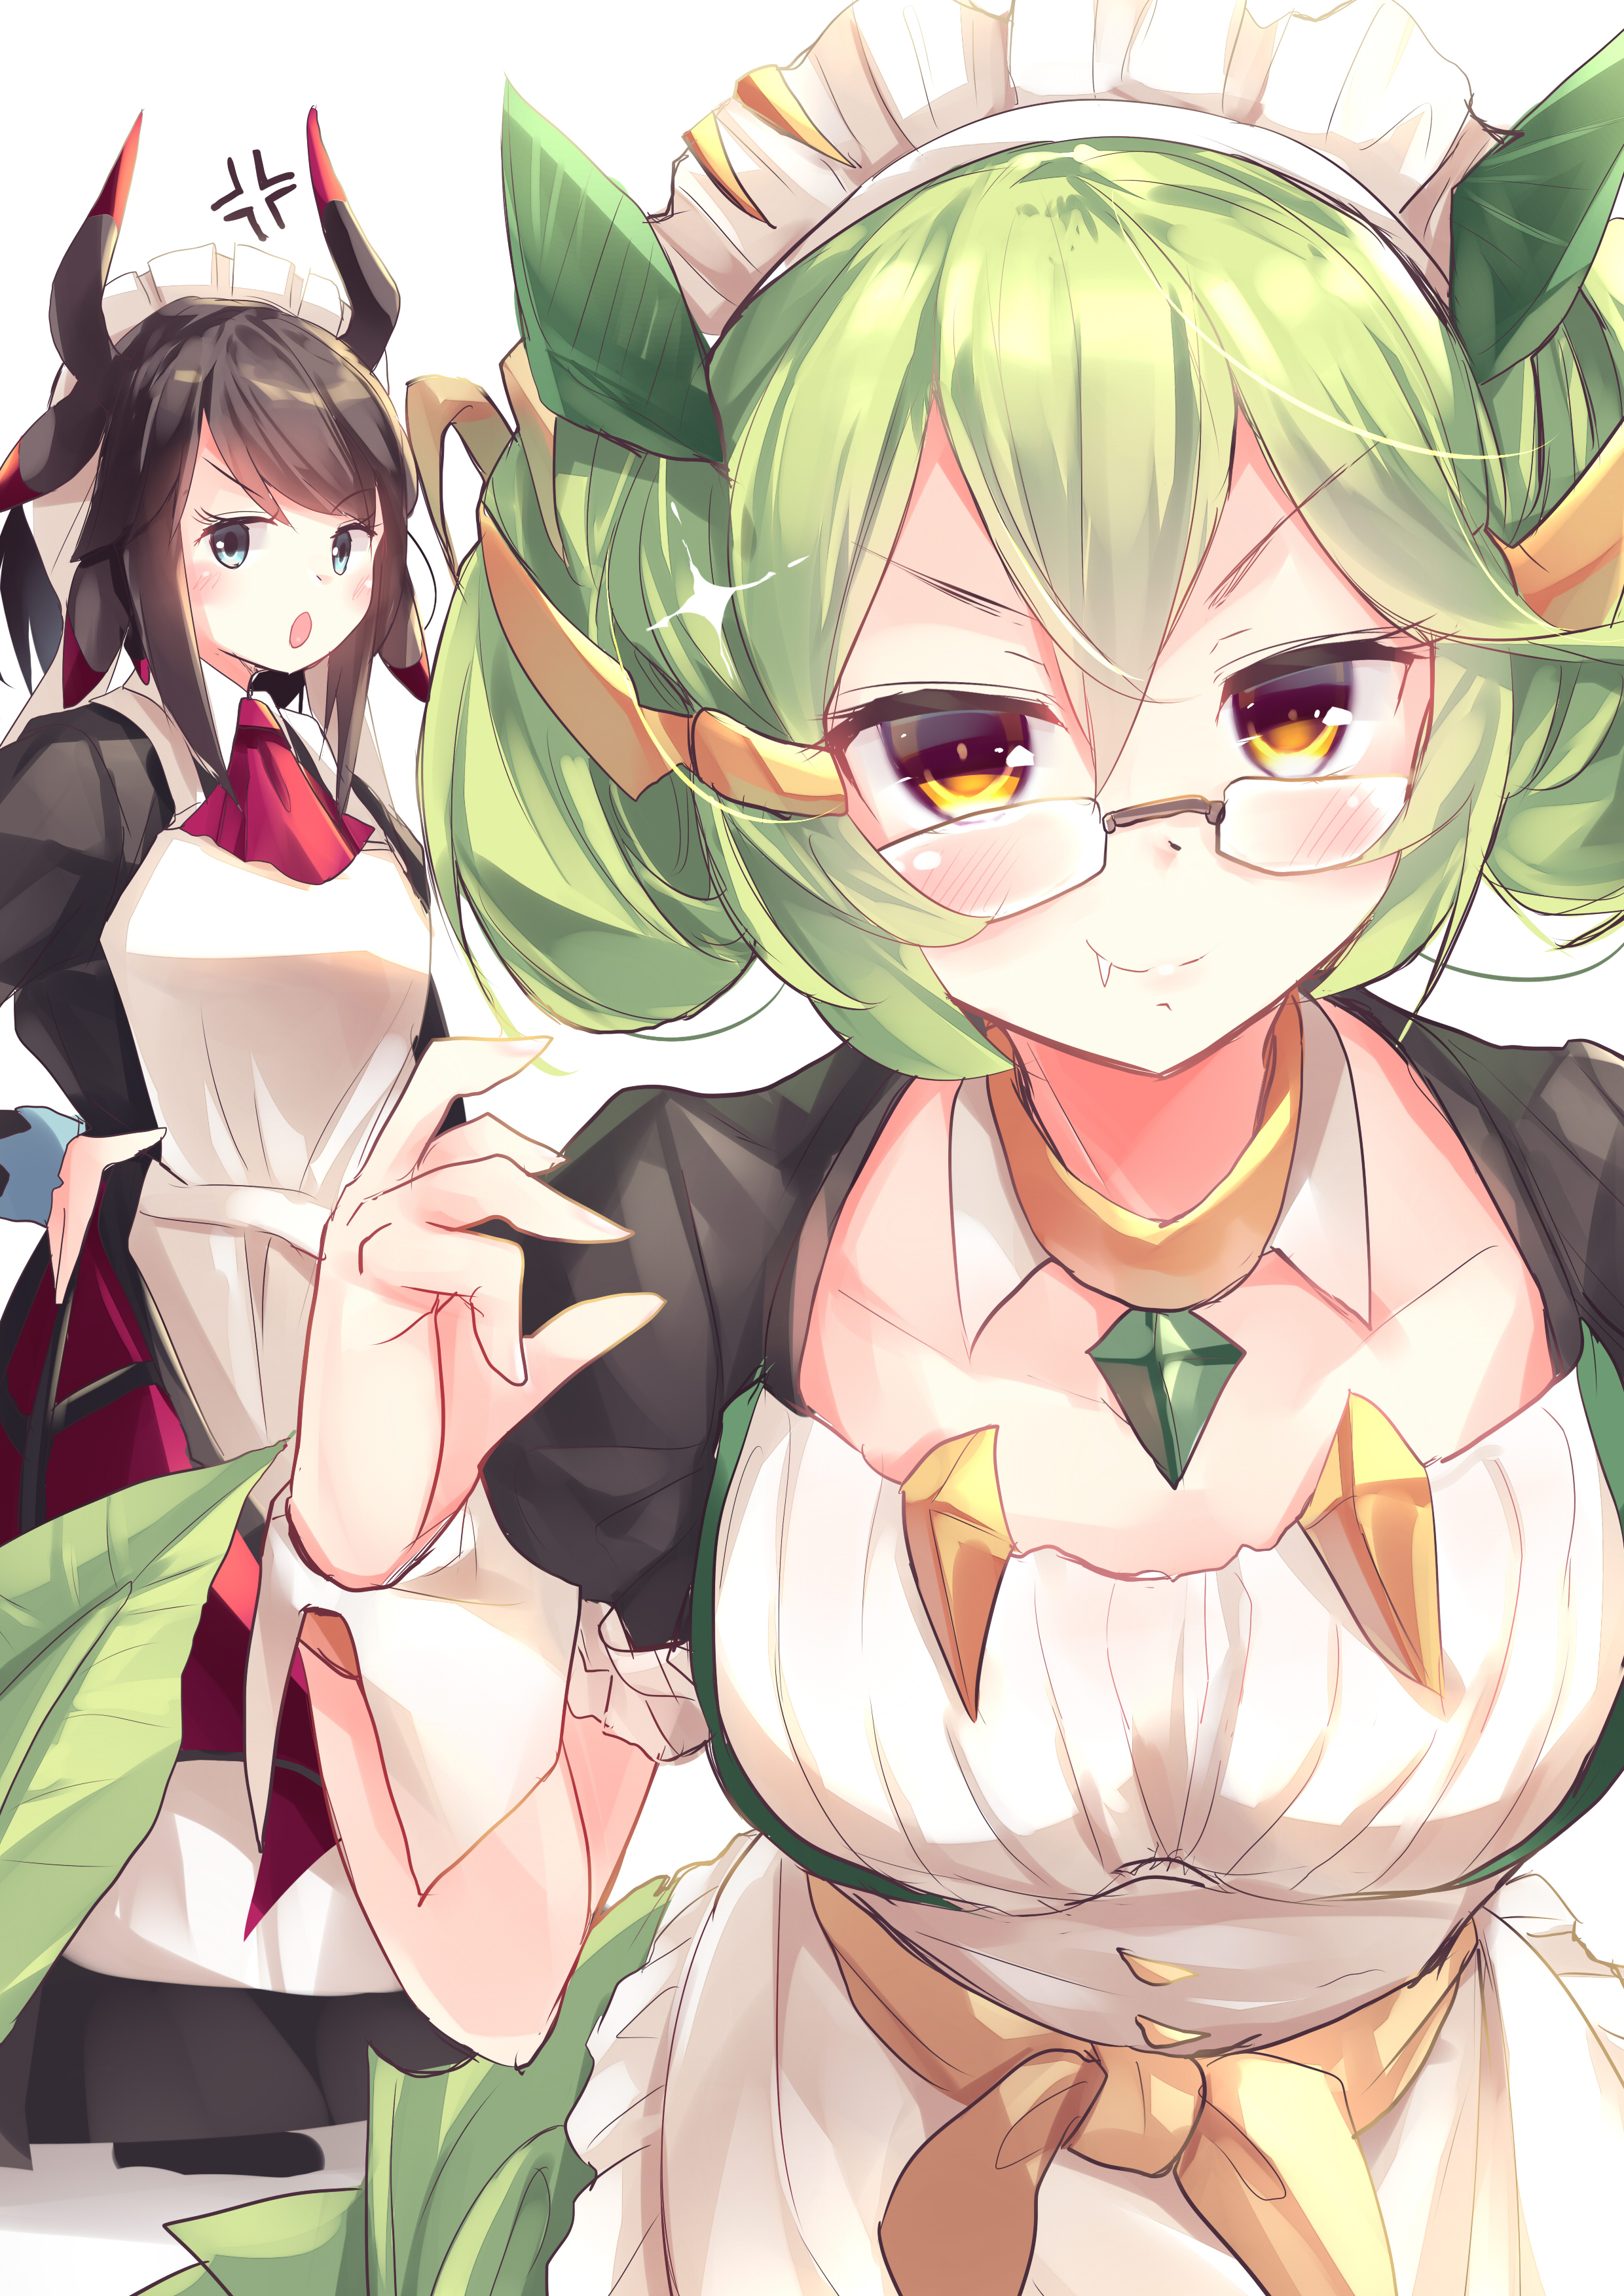 Anime 2480x3507 Yu-Gi-Oh! anime anime girls horns face fangs brunette green hair two women women with glasses House Dragonmaid Parlor Dragonmaid